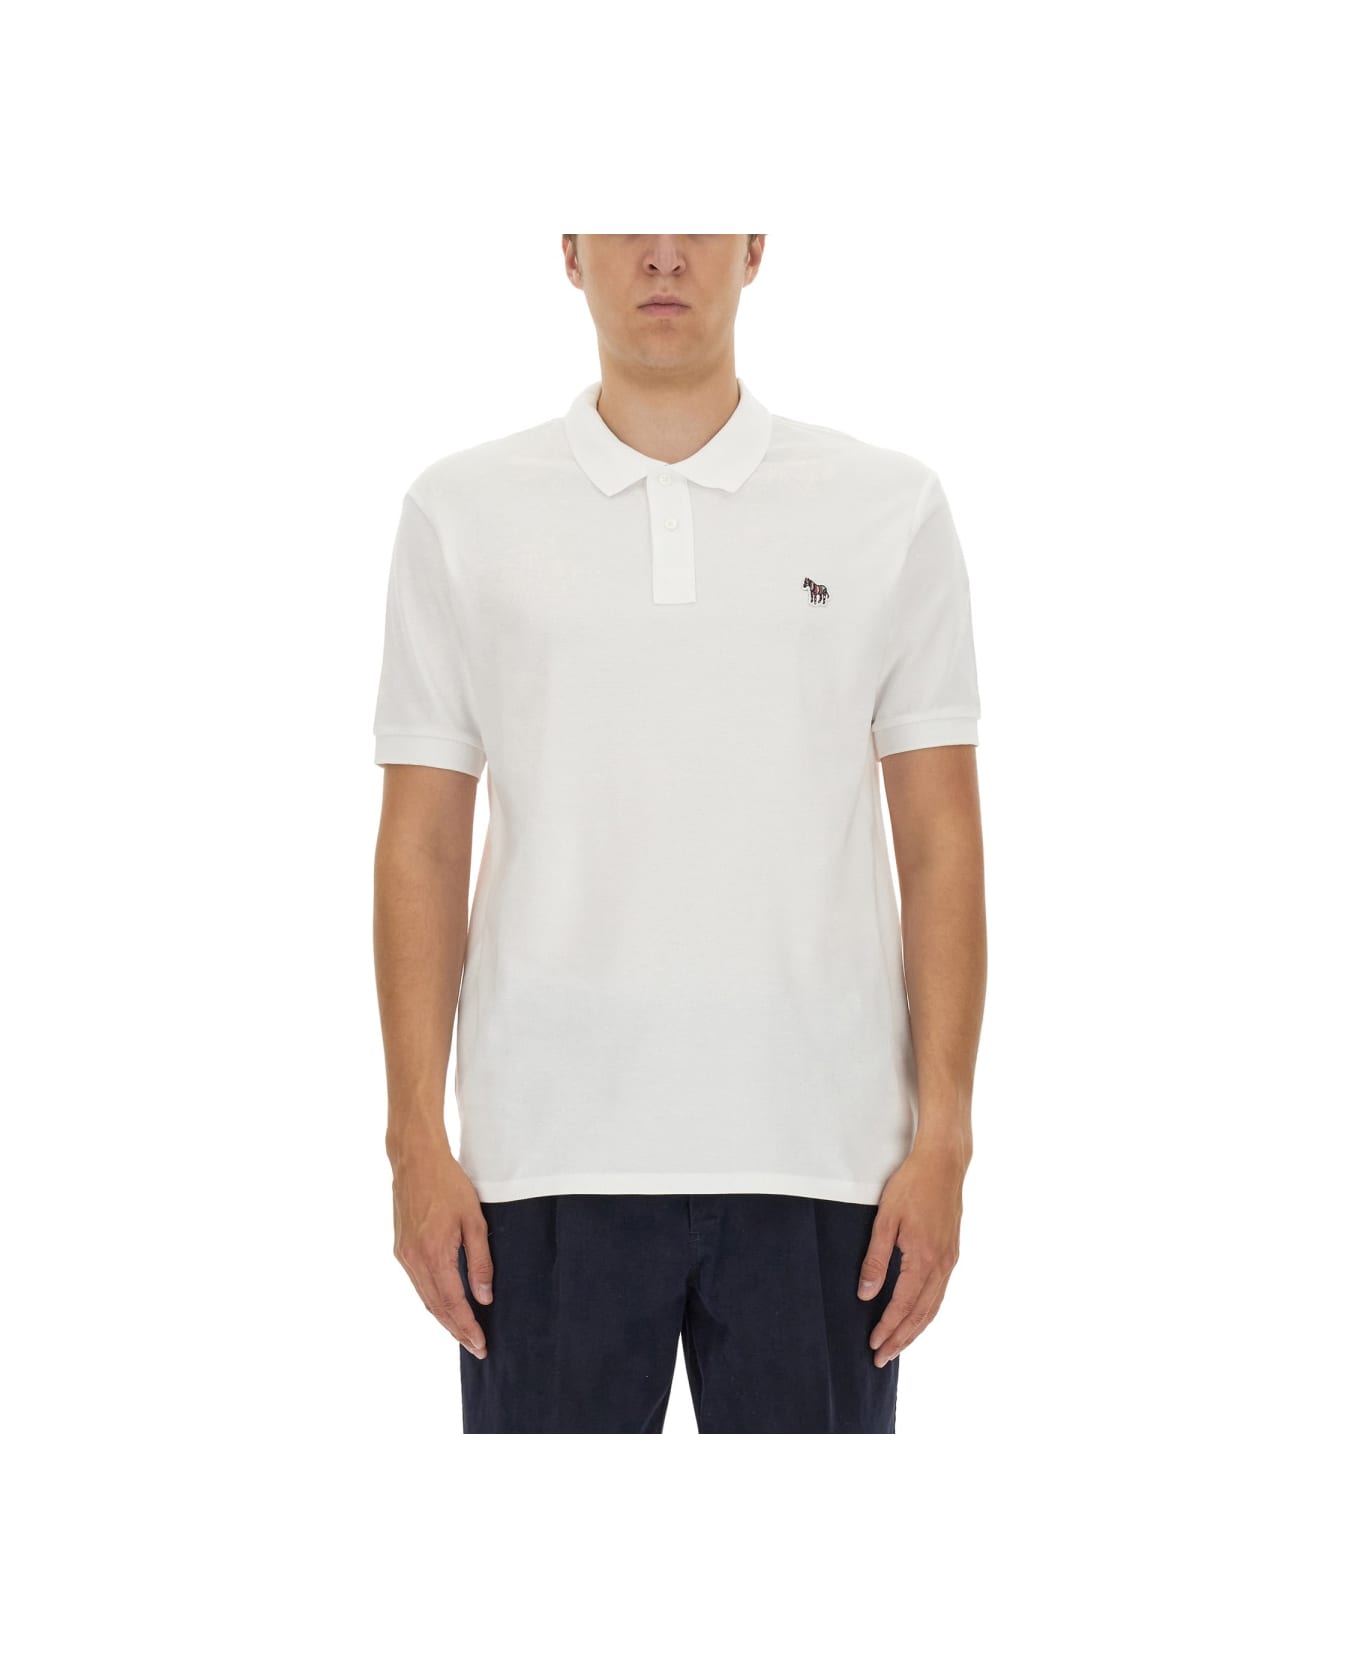 PS by Paul Smith Polo Shirt With Zebra Patch - WHITE